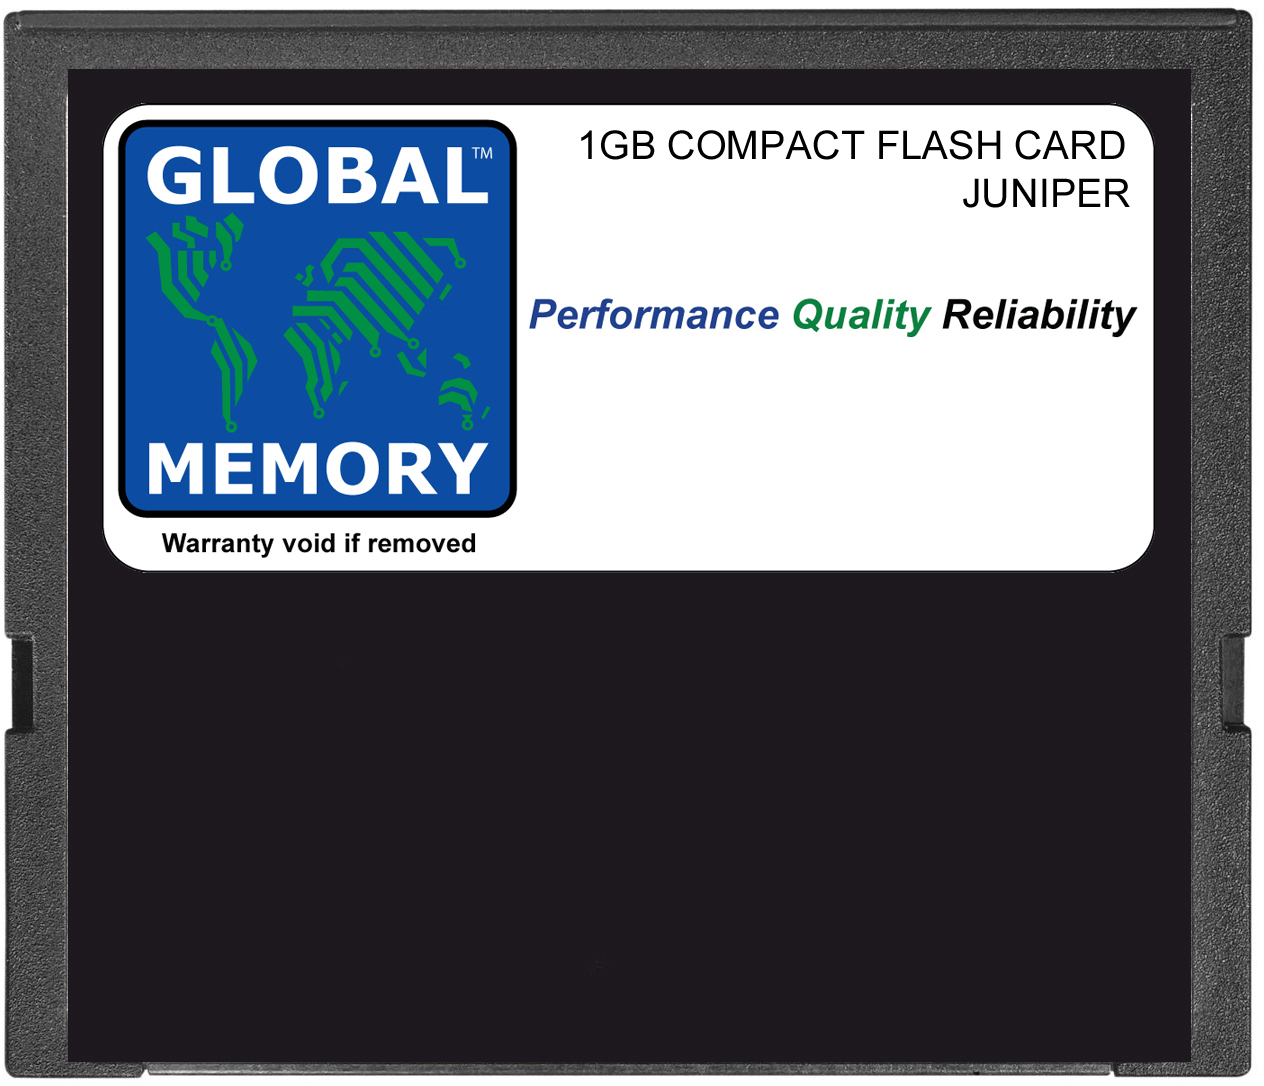 1GB COMPACT FLASH CARD MEMORY FOR JUNIPER J2300 / J4300 / J6300 SERIES ROUTERS & ROUTING ENGINES (JX-CF-1G-S , RE-CF-1G-S) - Click Image to Close